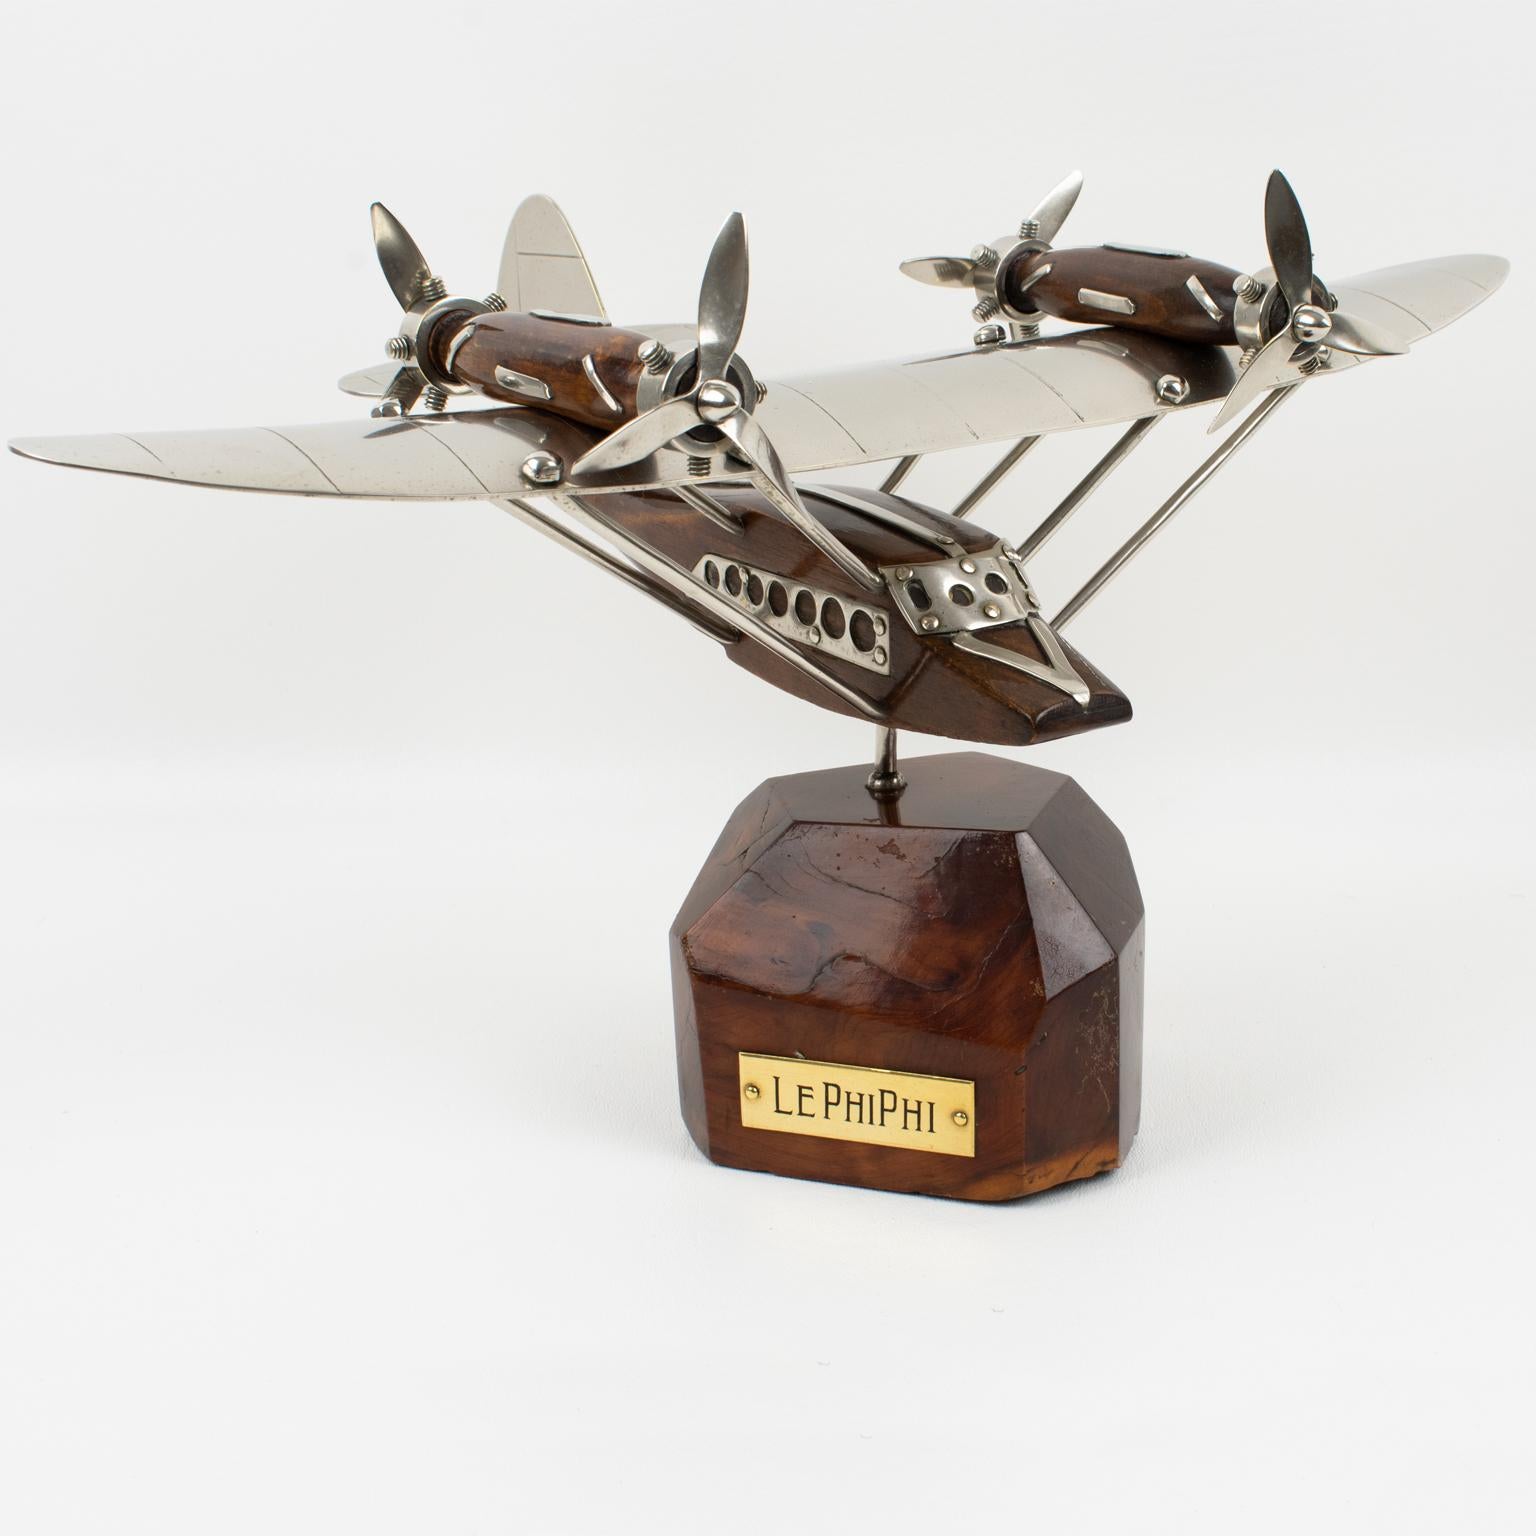 Art Deco Wood and Chrome Airplane SeaPlane Aviation Model, France 1940s In Good Condition For Sale In Atlanta, GA